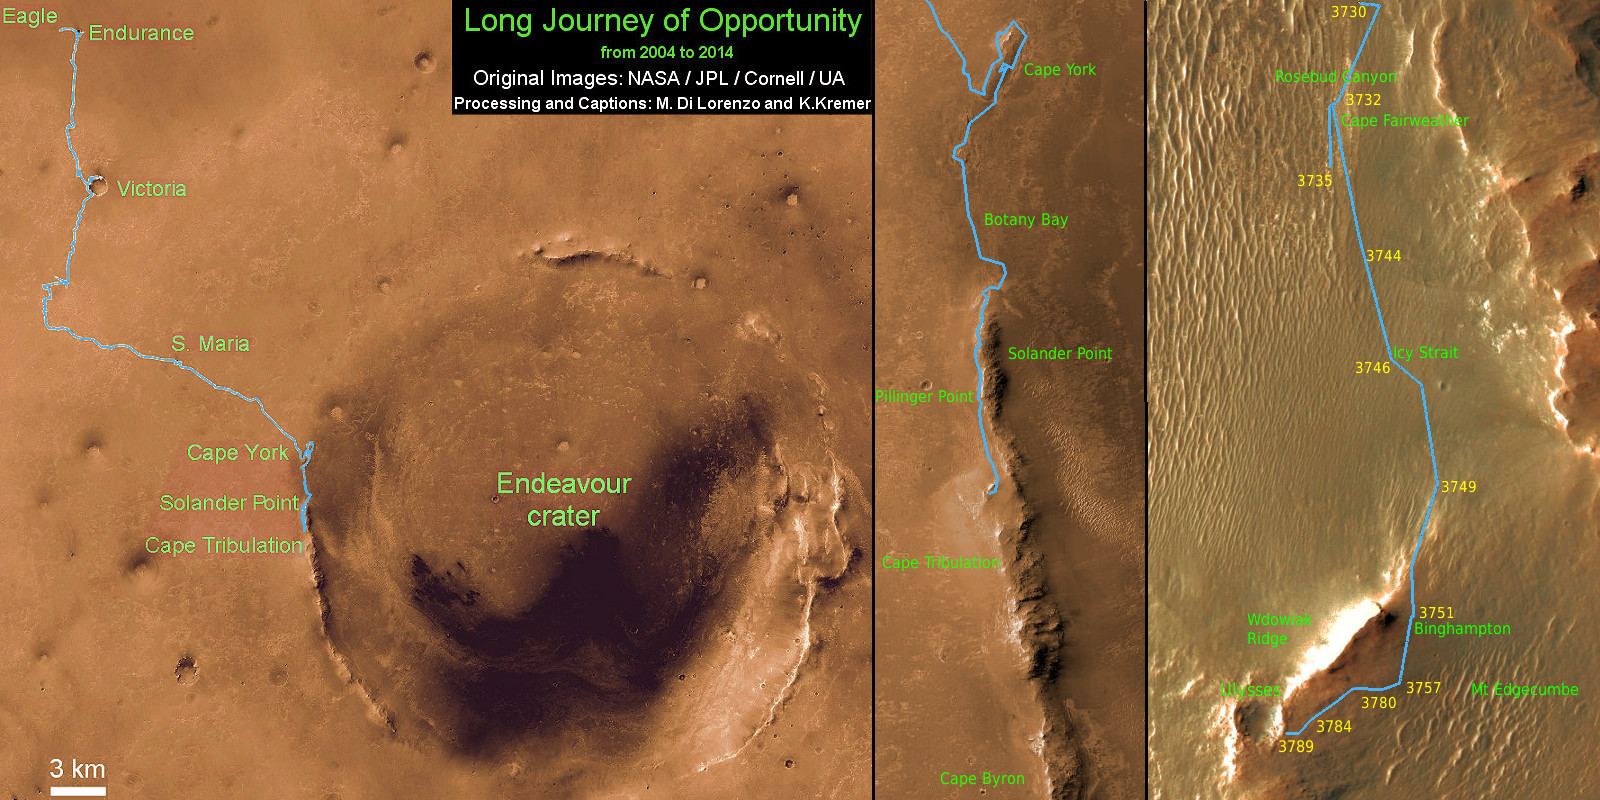 Traverse Map for NASA’s Opportunity rover from 2004 to 2014 – A Decade on Mars This map shows the entire path the rover has driven during a decade on Mars and over 3800 Sols, or Martian days, since landing inside Eagle Crater on Jan 24, 2004 to current location at Ulysses Crater at the western rim of Endeavour Crater and heading to clay minerals at Cape Tribulation. Opportunity discovered clay minerals at Esperance on Cape York– indicative of a habitable zone. Credit: NASA/JPL/Cornell/ASU/Marco Di Lorenzo/Ken Kremer - kenkremer.com 